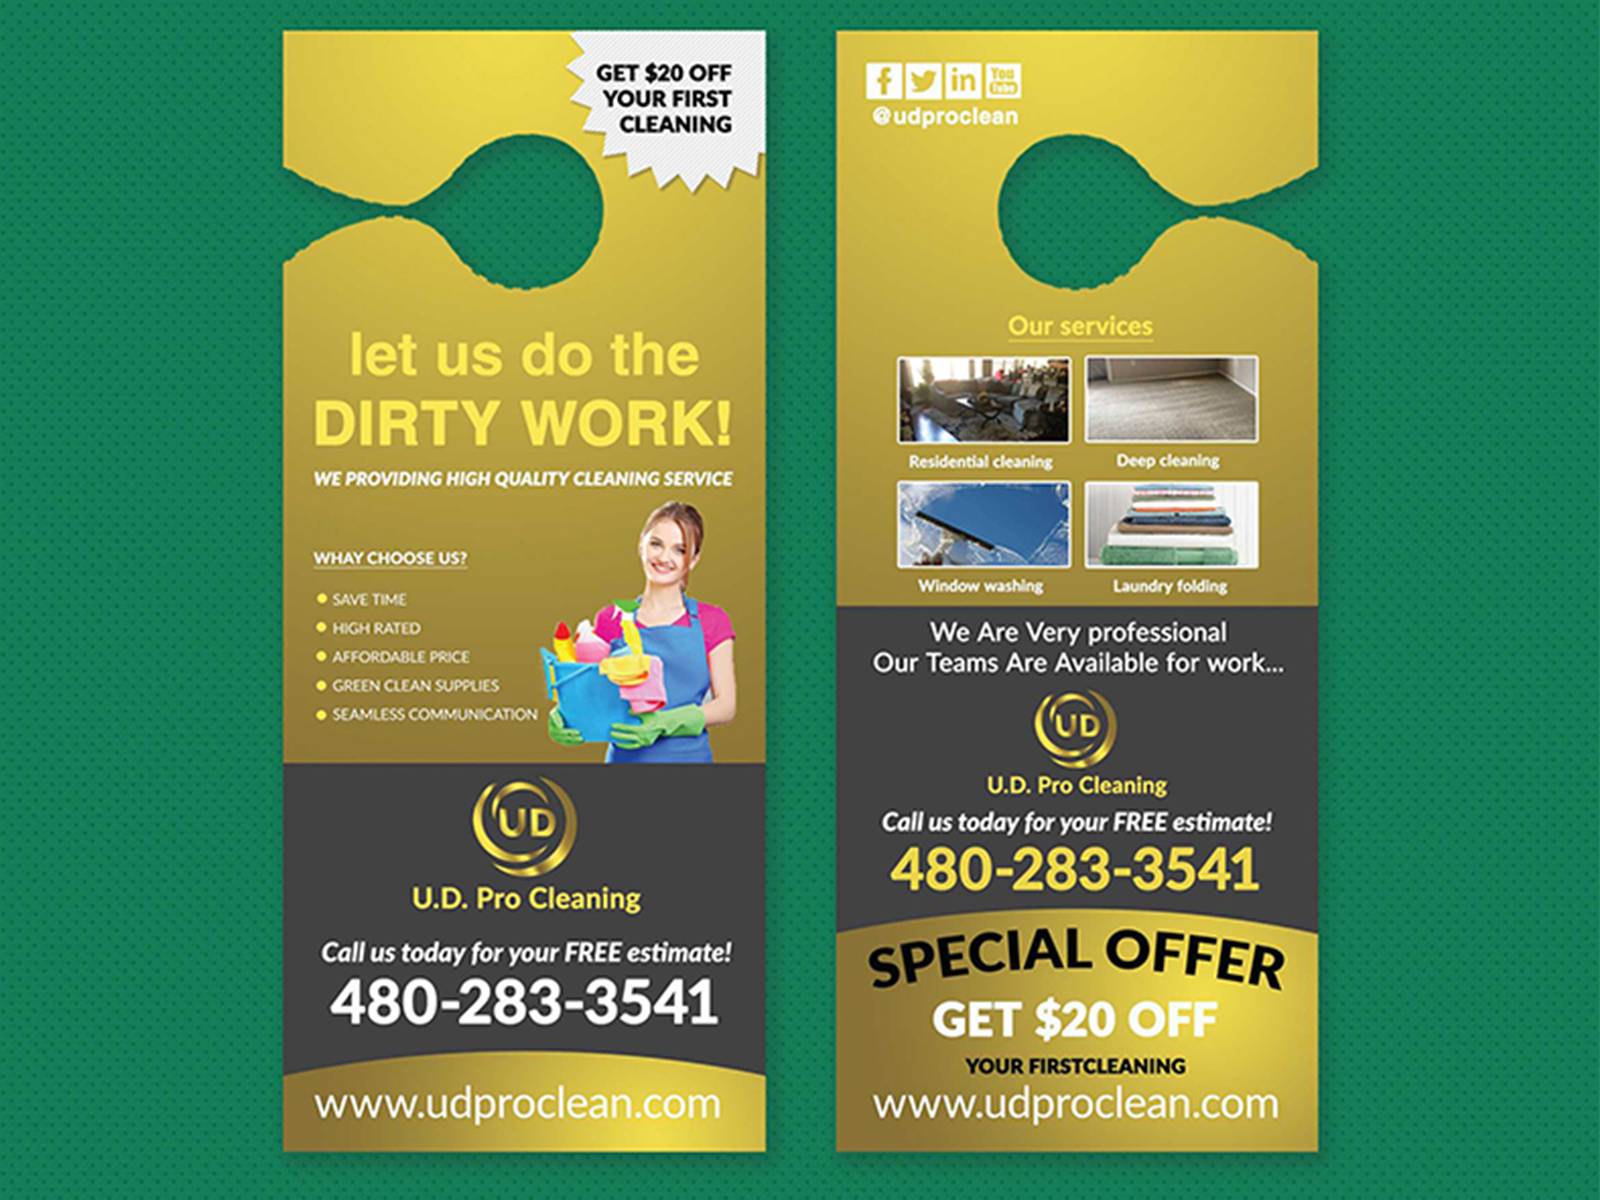 Cleaning Service Door Hanger Design by Md.Mahatab Uddin on Dribbble